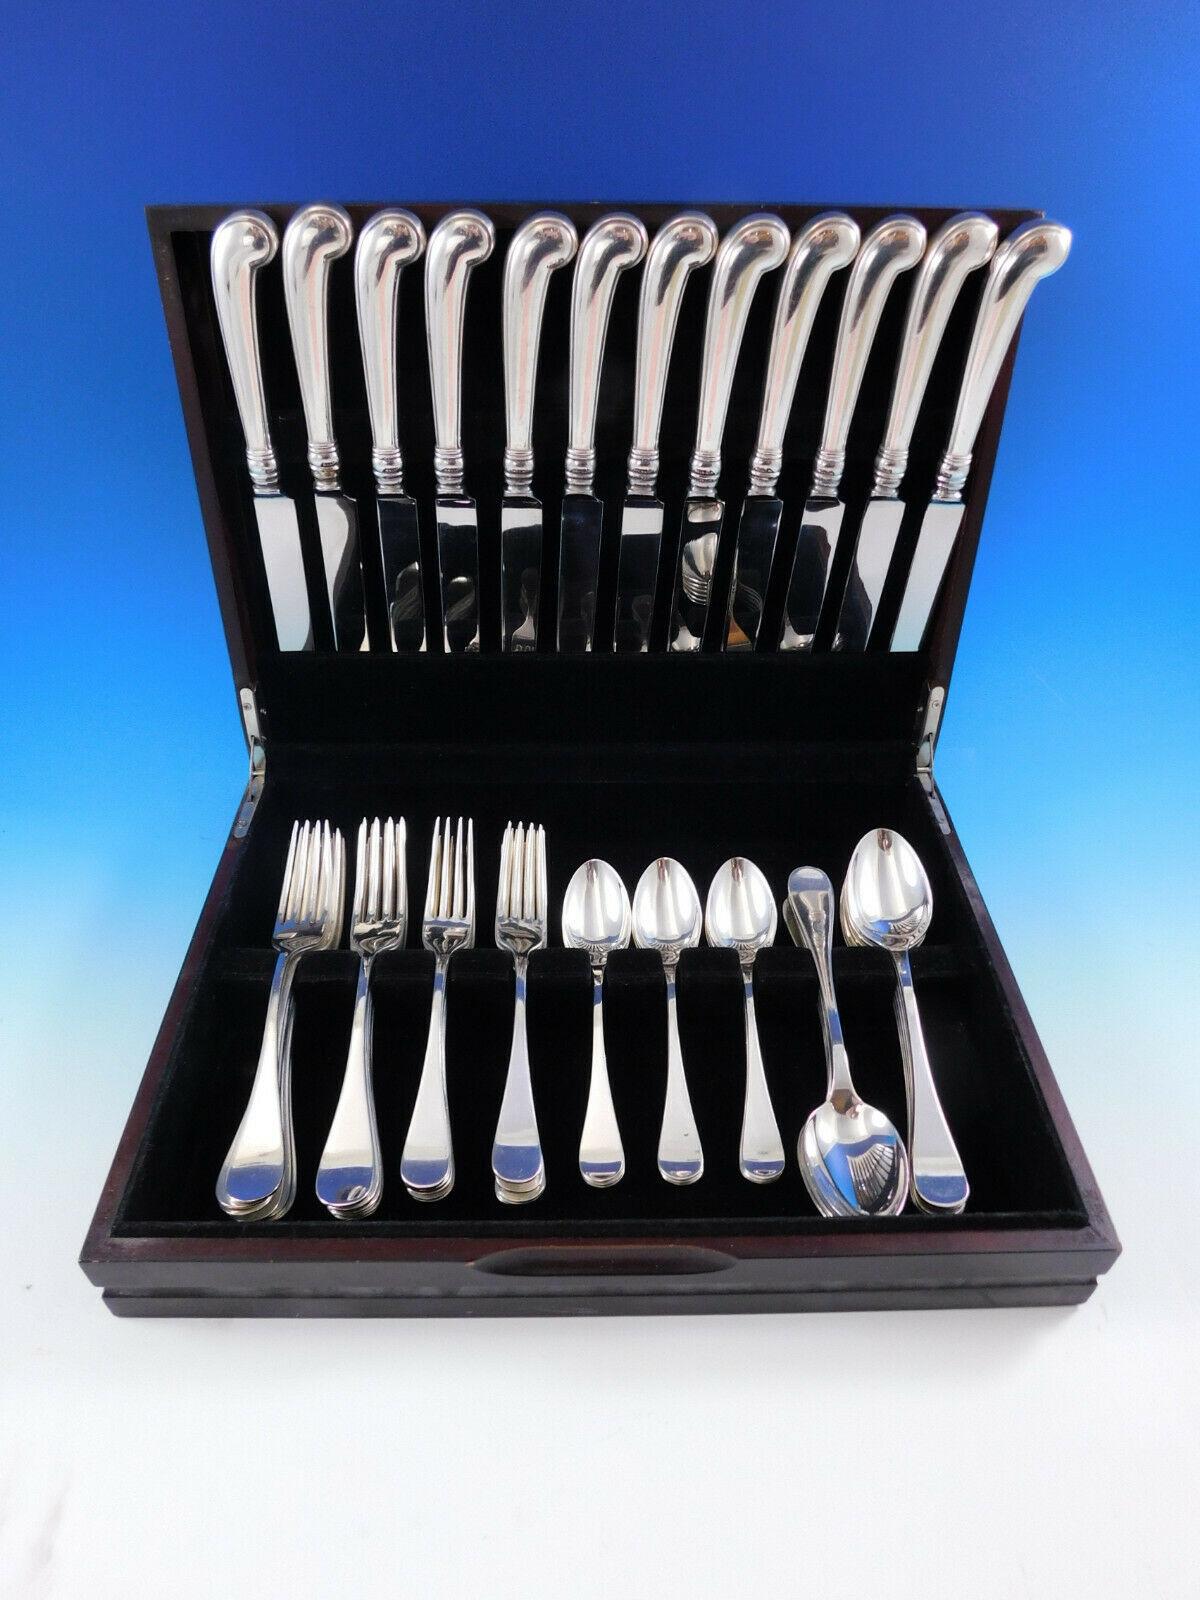 Outstanding Dinner Size King William by Tiffany and Co. sterling silver flatware set, 60 pieces. This old English style pattern was introduced in the year 1870. The pieces are large and heavy, with fabulous pistol grip handle knives. This set